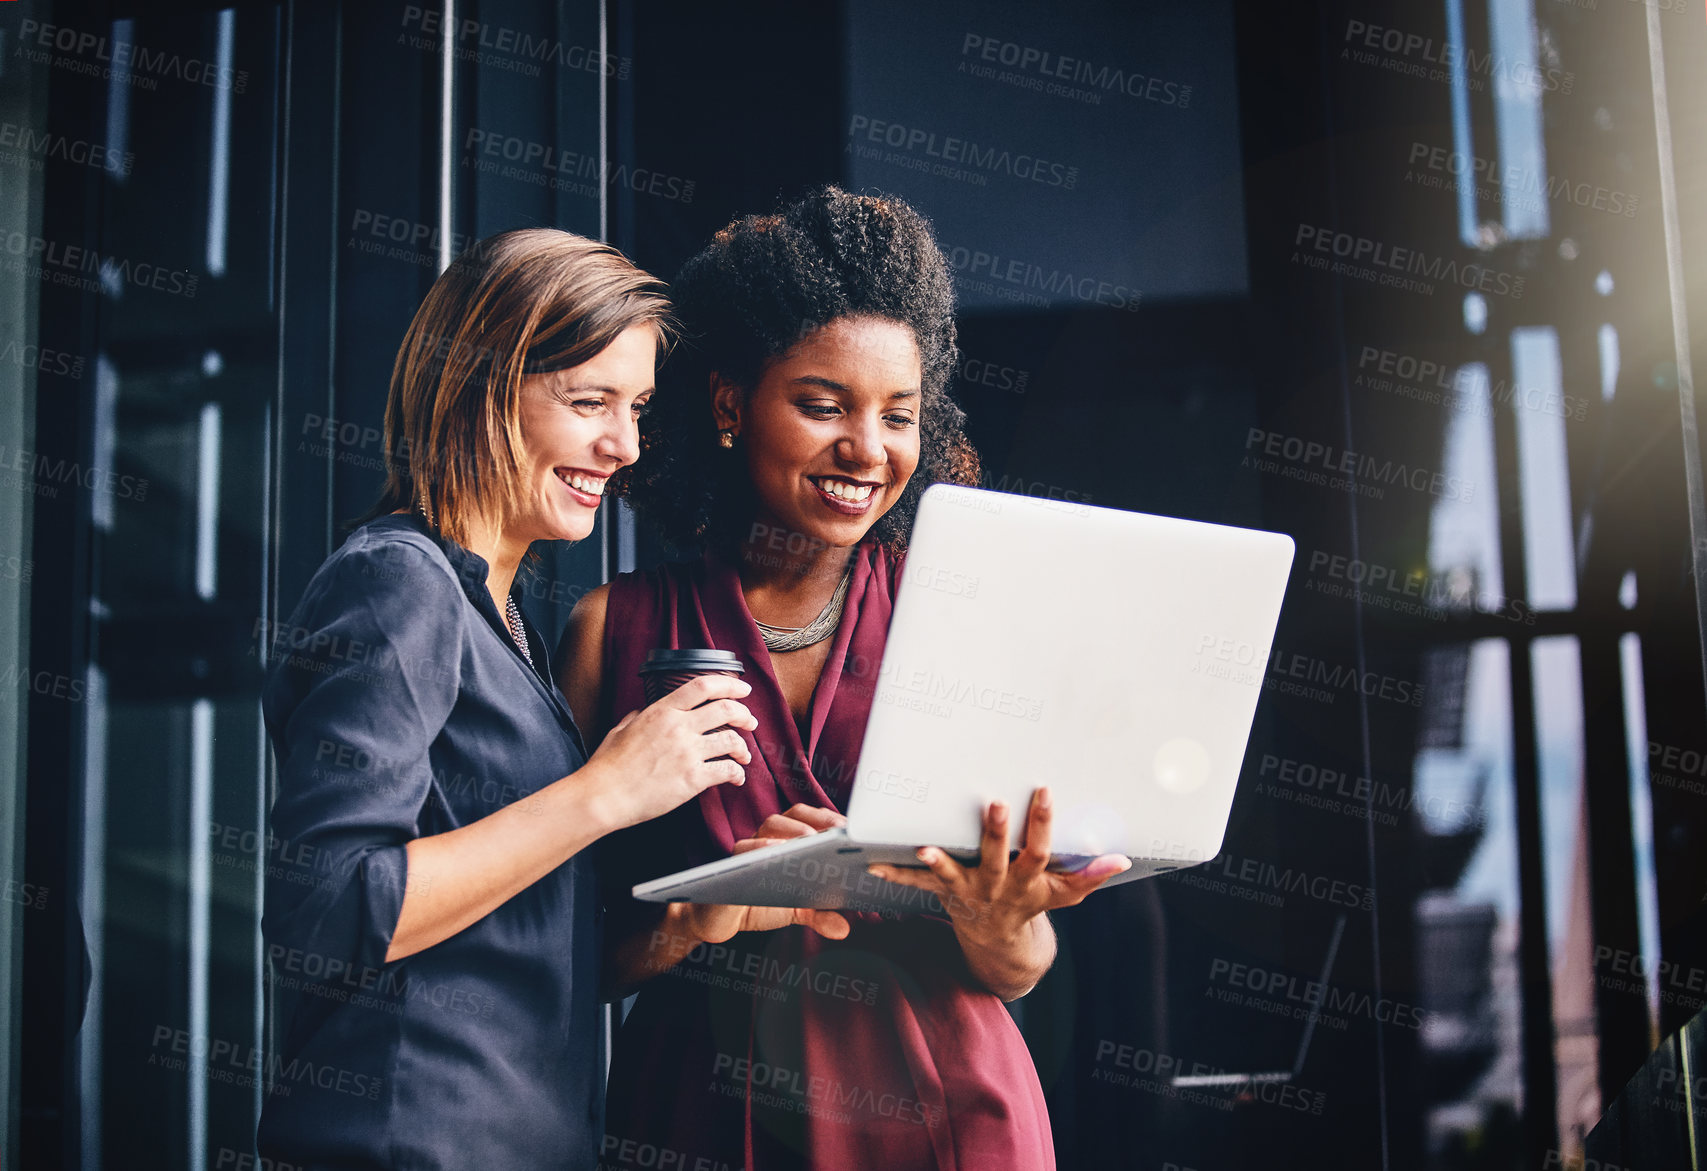 Buy stock photo Cropped shot of two young businesswomen using a laptop outside an office